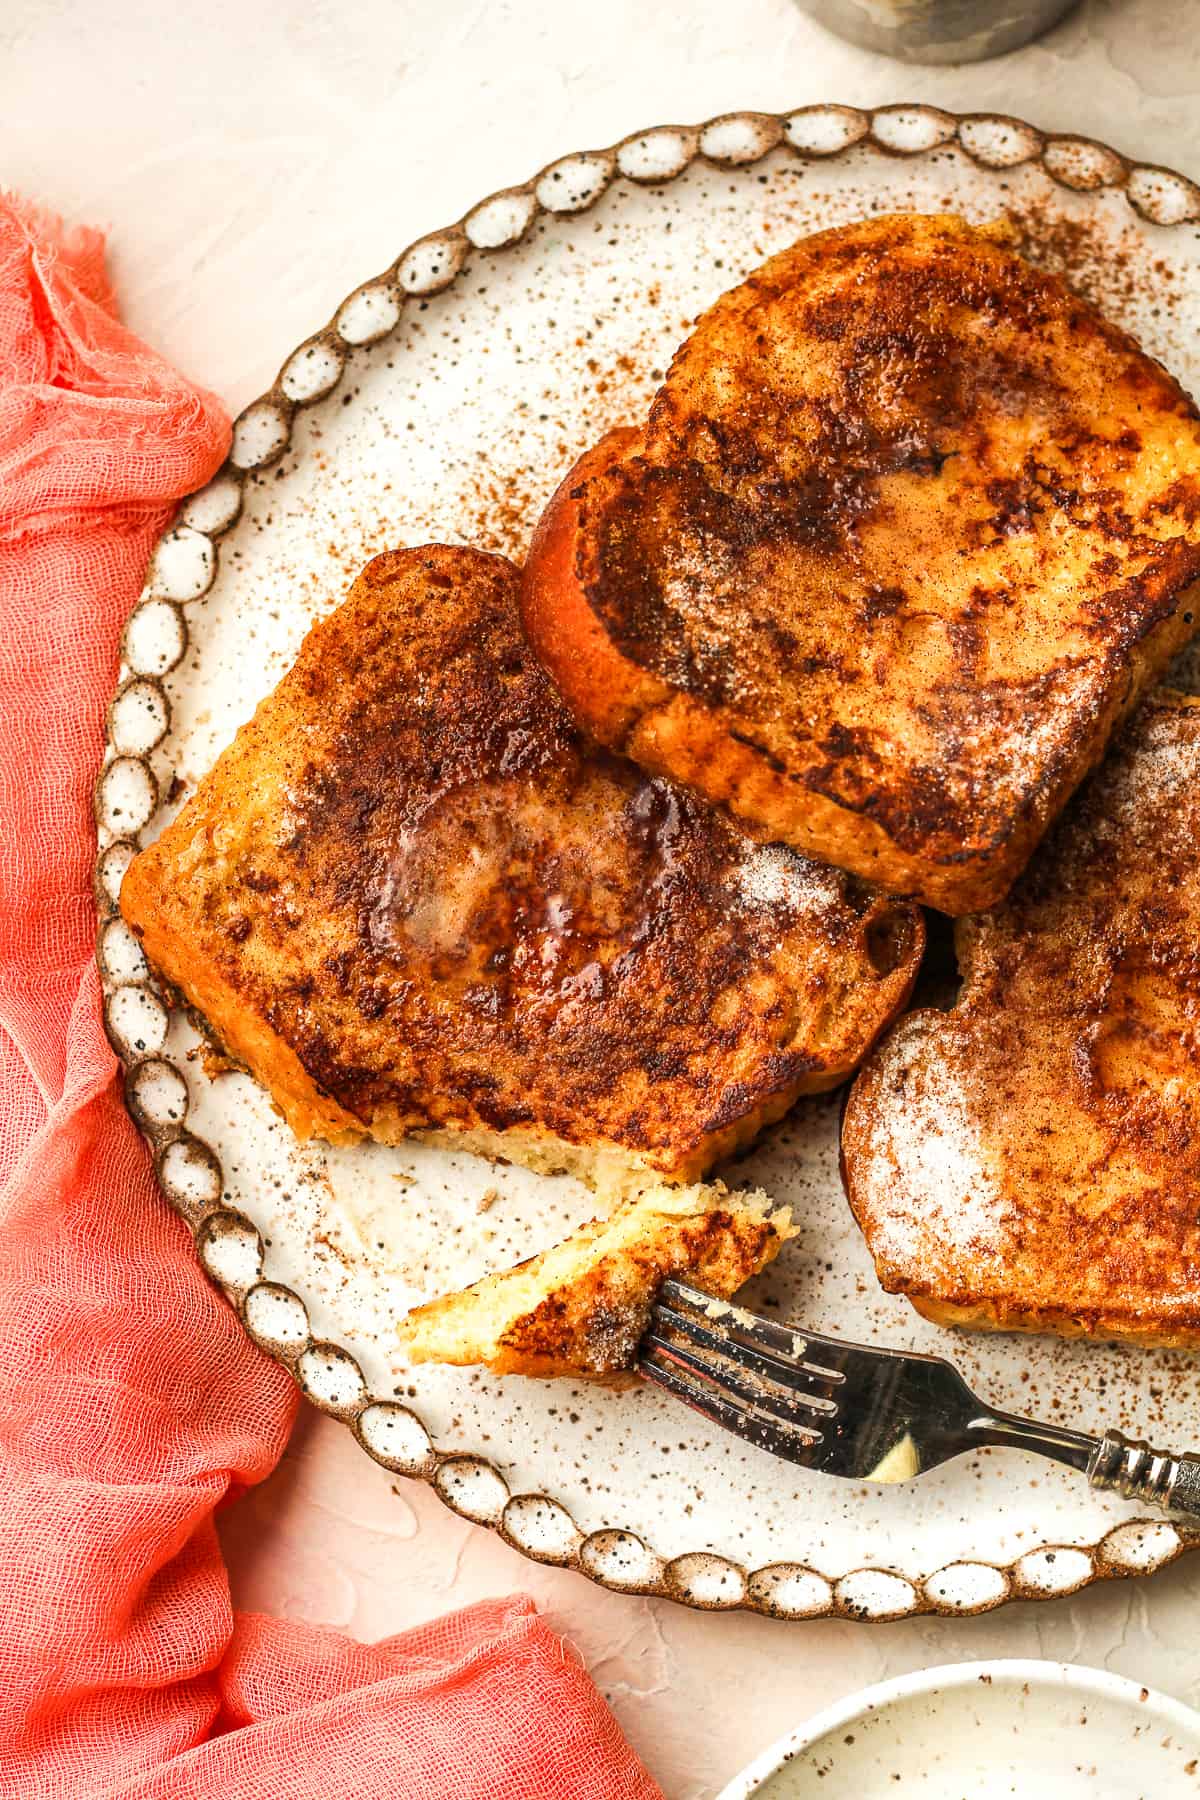 A plate of three pieces of brioche French toast with a fork.